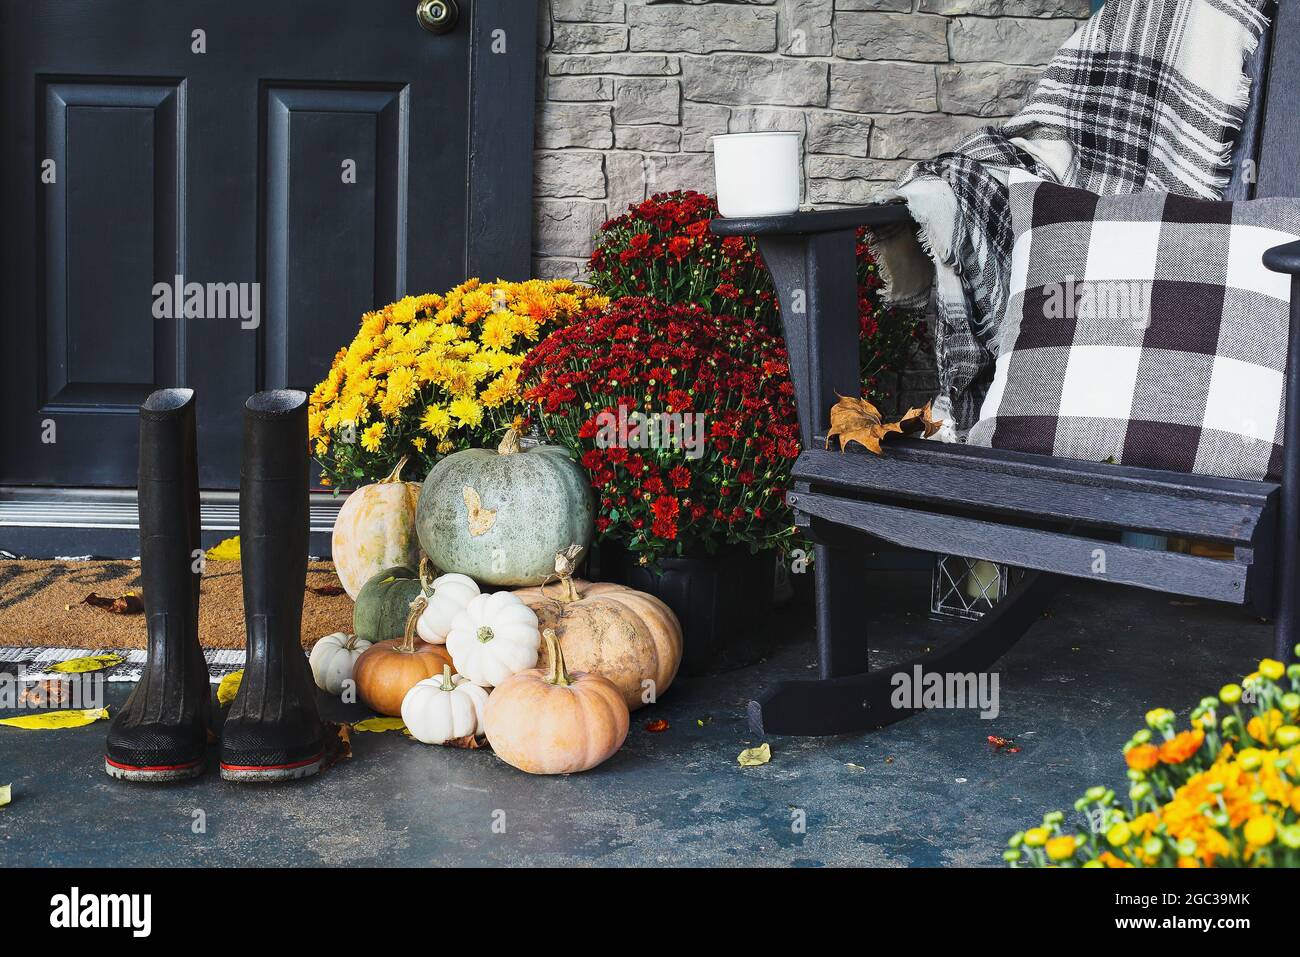 Hot steaming coffee sitting on rocking chair on front porch that has been decorated for autumn with heirloom white, orange, grey pumpkins, rain boots Stock Photo